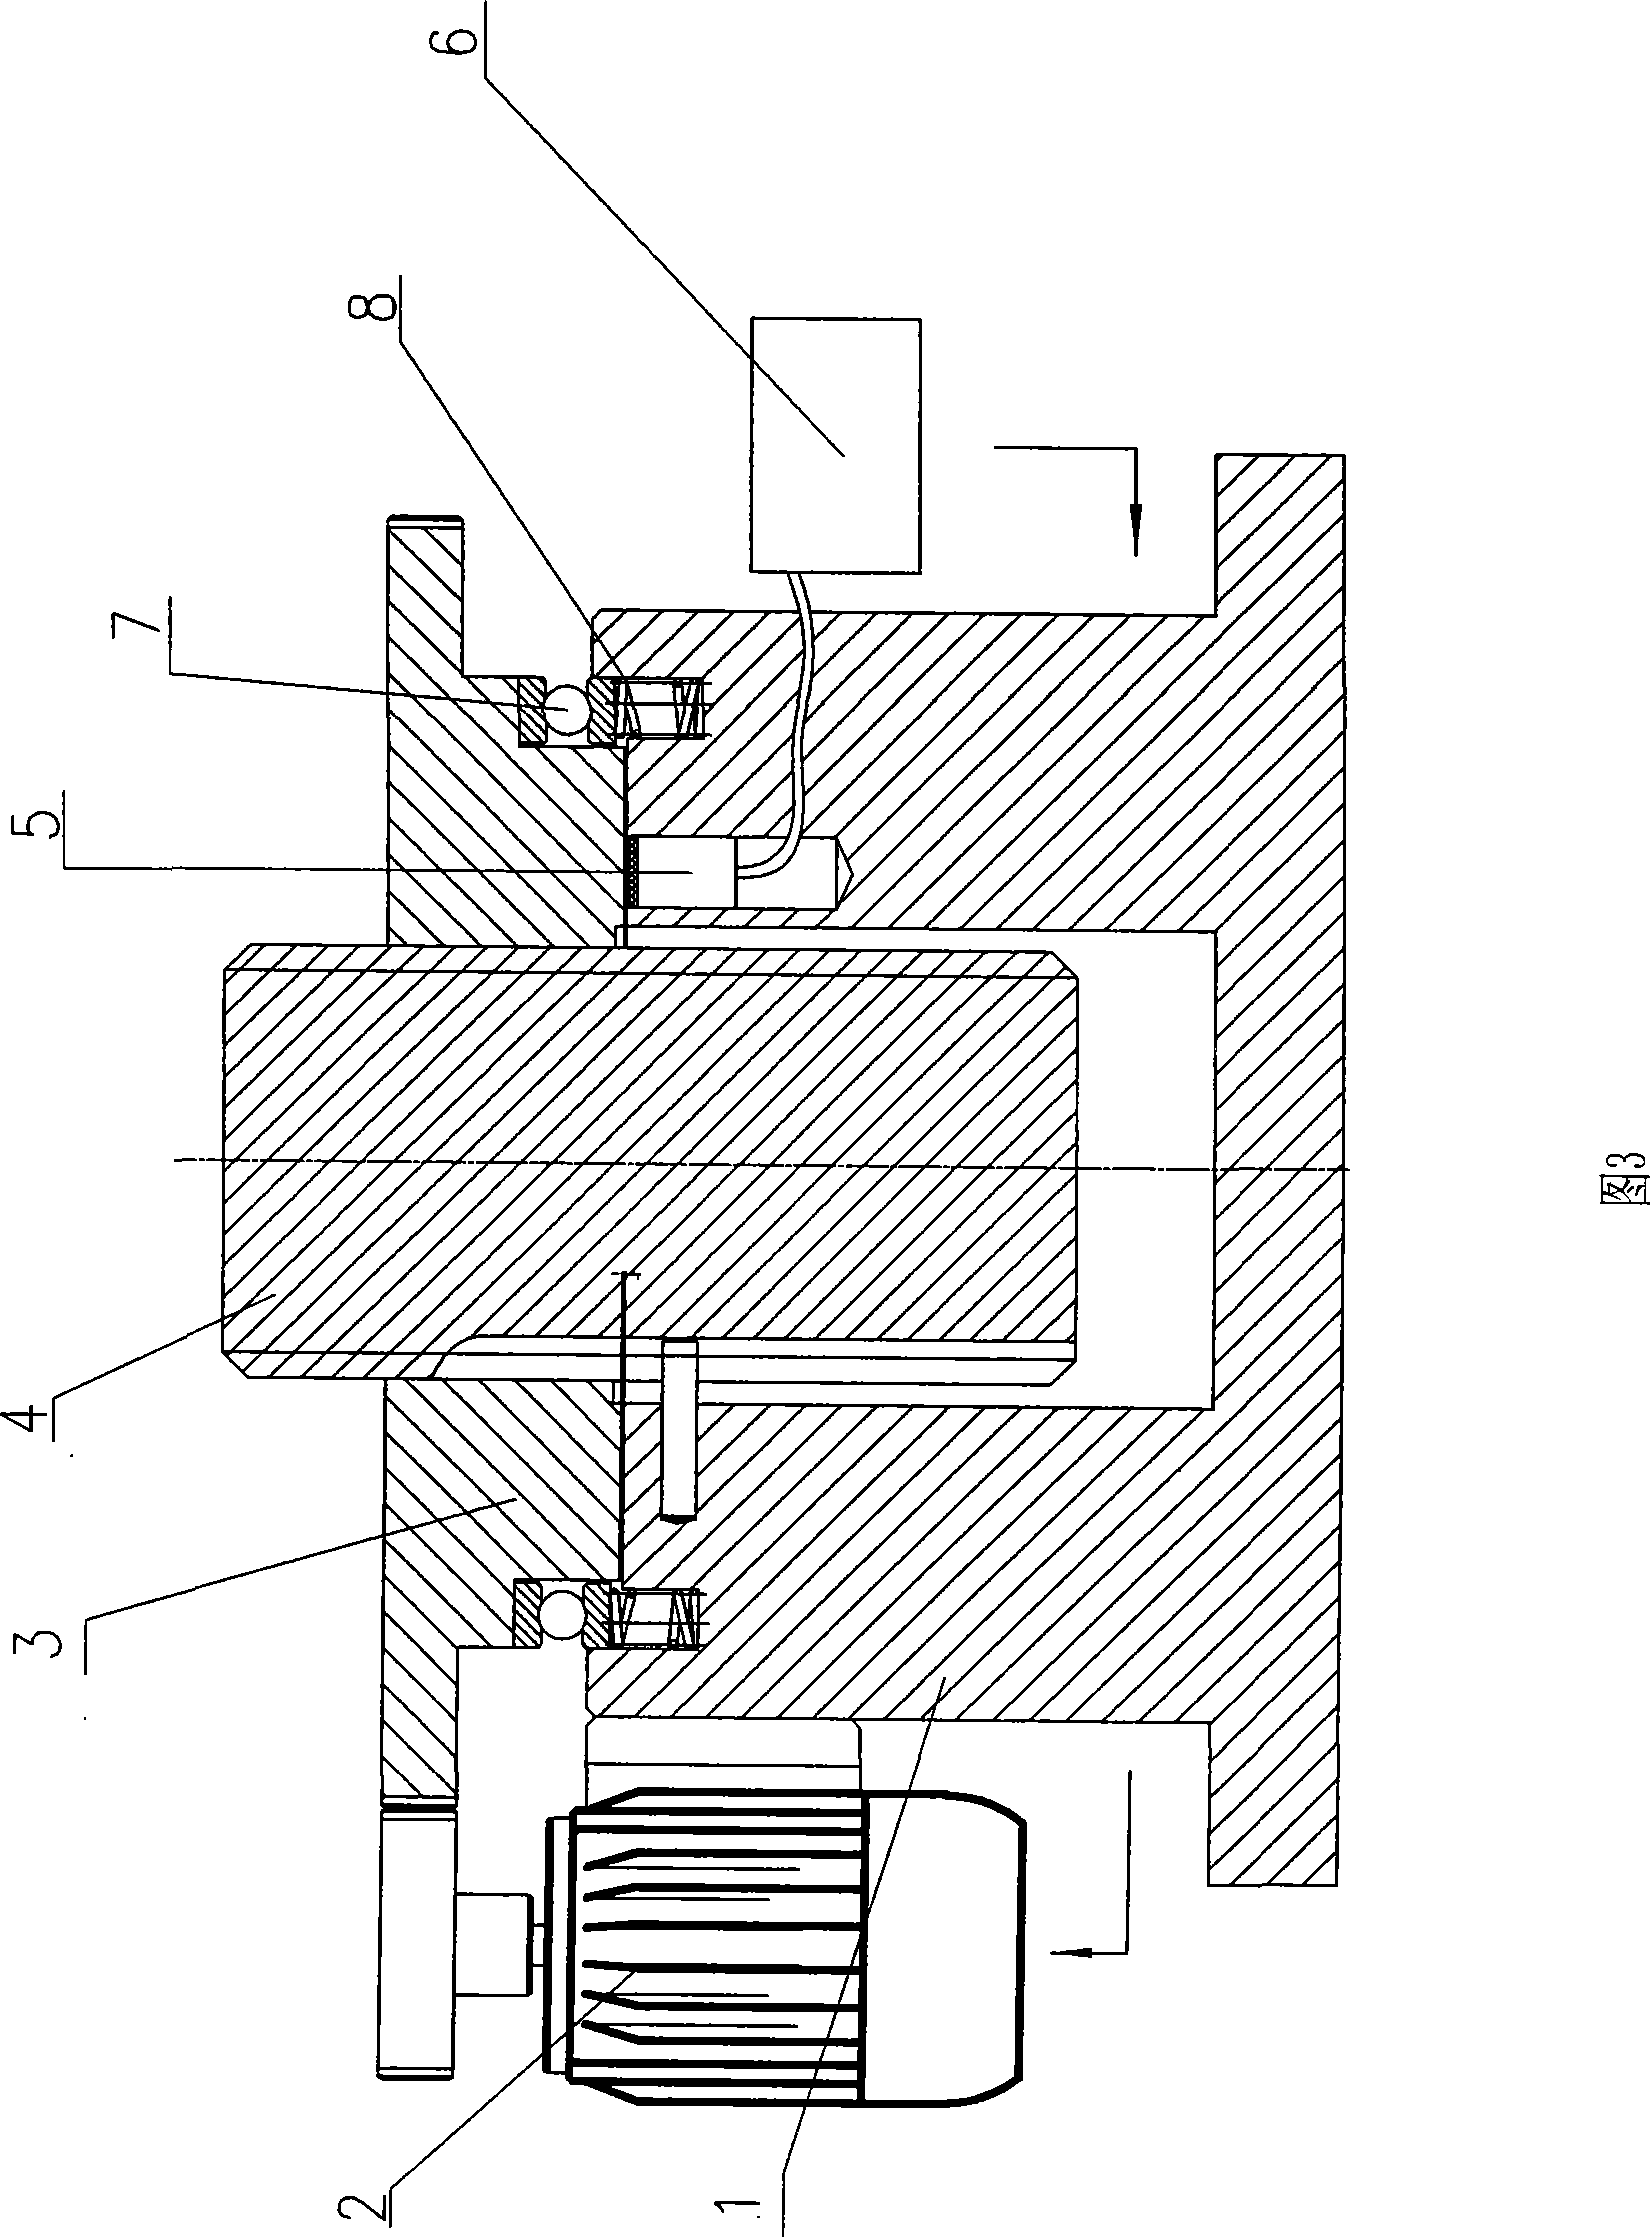 Screw rod follow-up supporting mechanism of lifting device